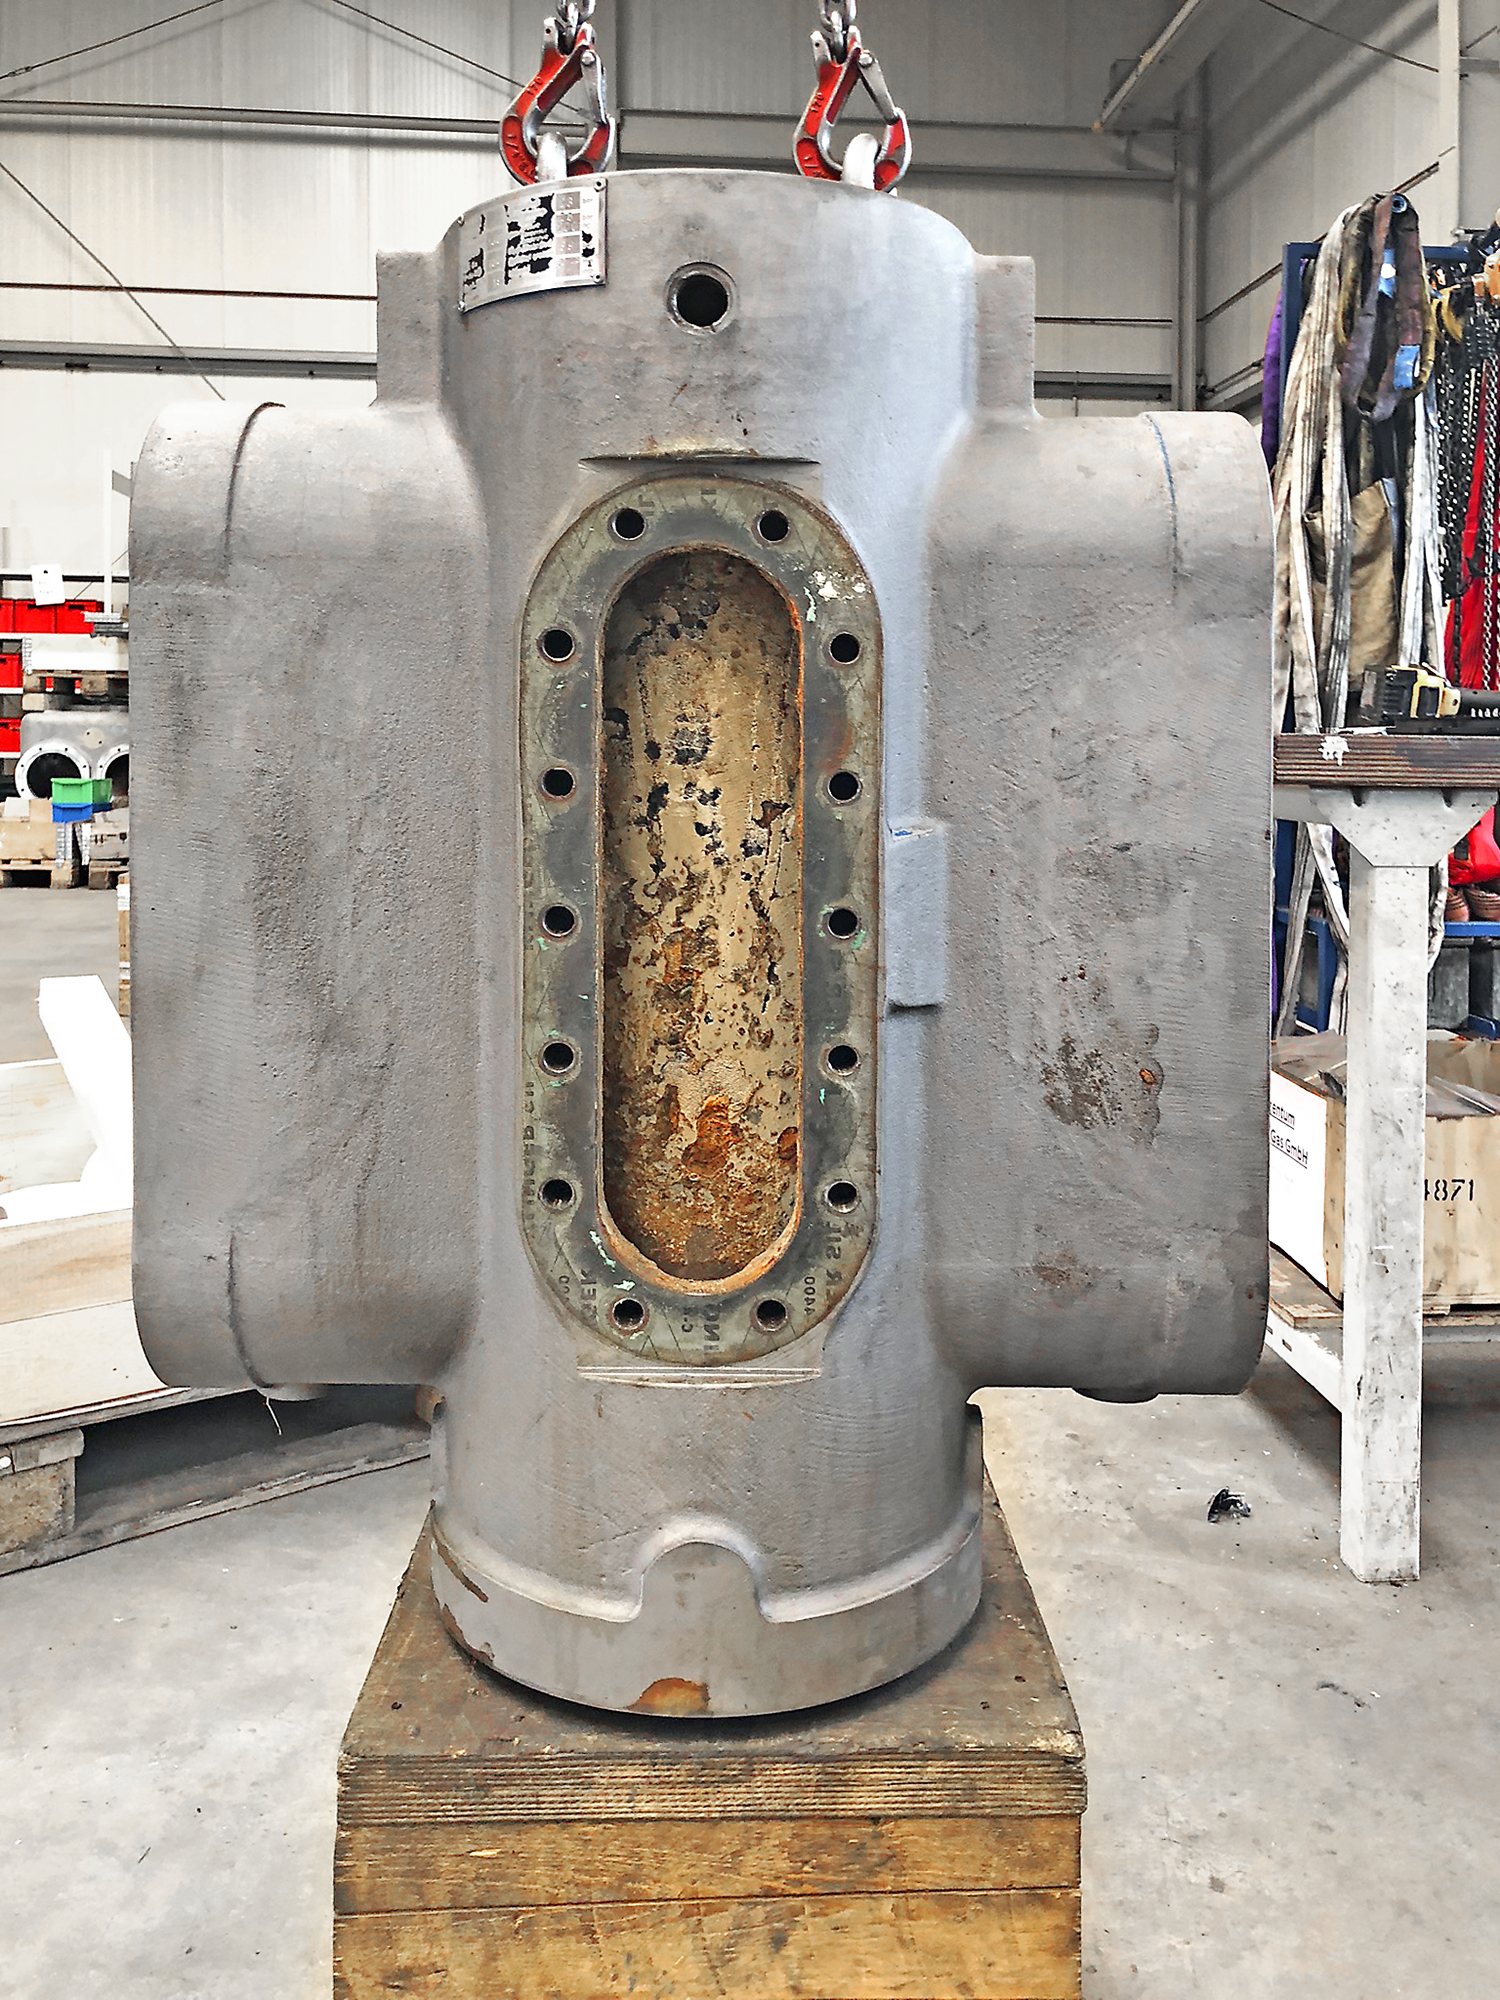 The cylinder before it was repaired at Burckhardt Compression Germany's Service Center